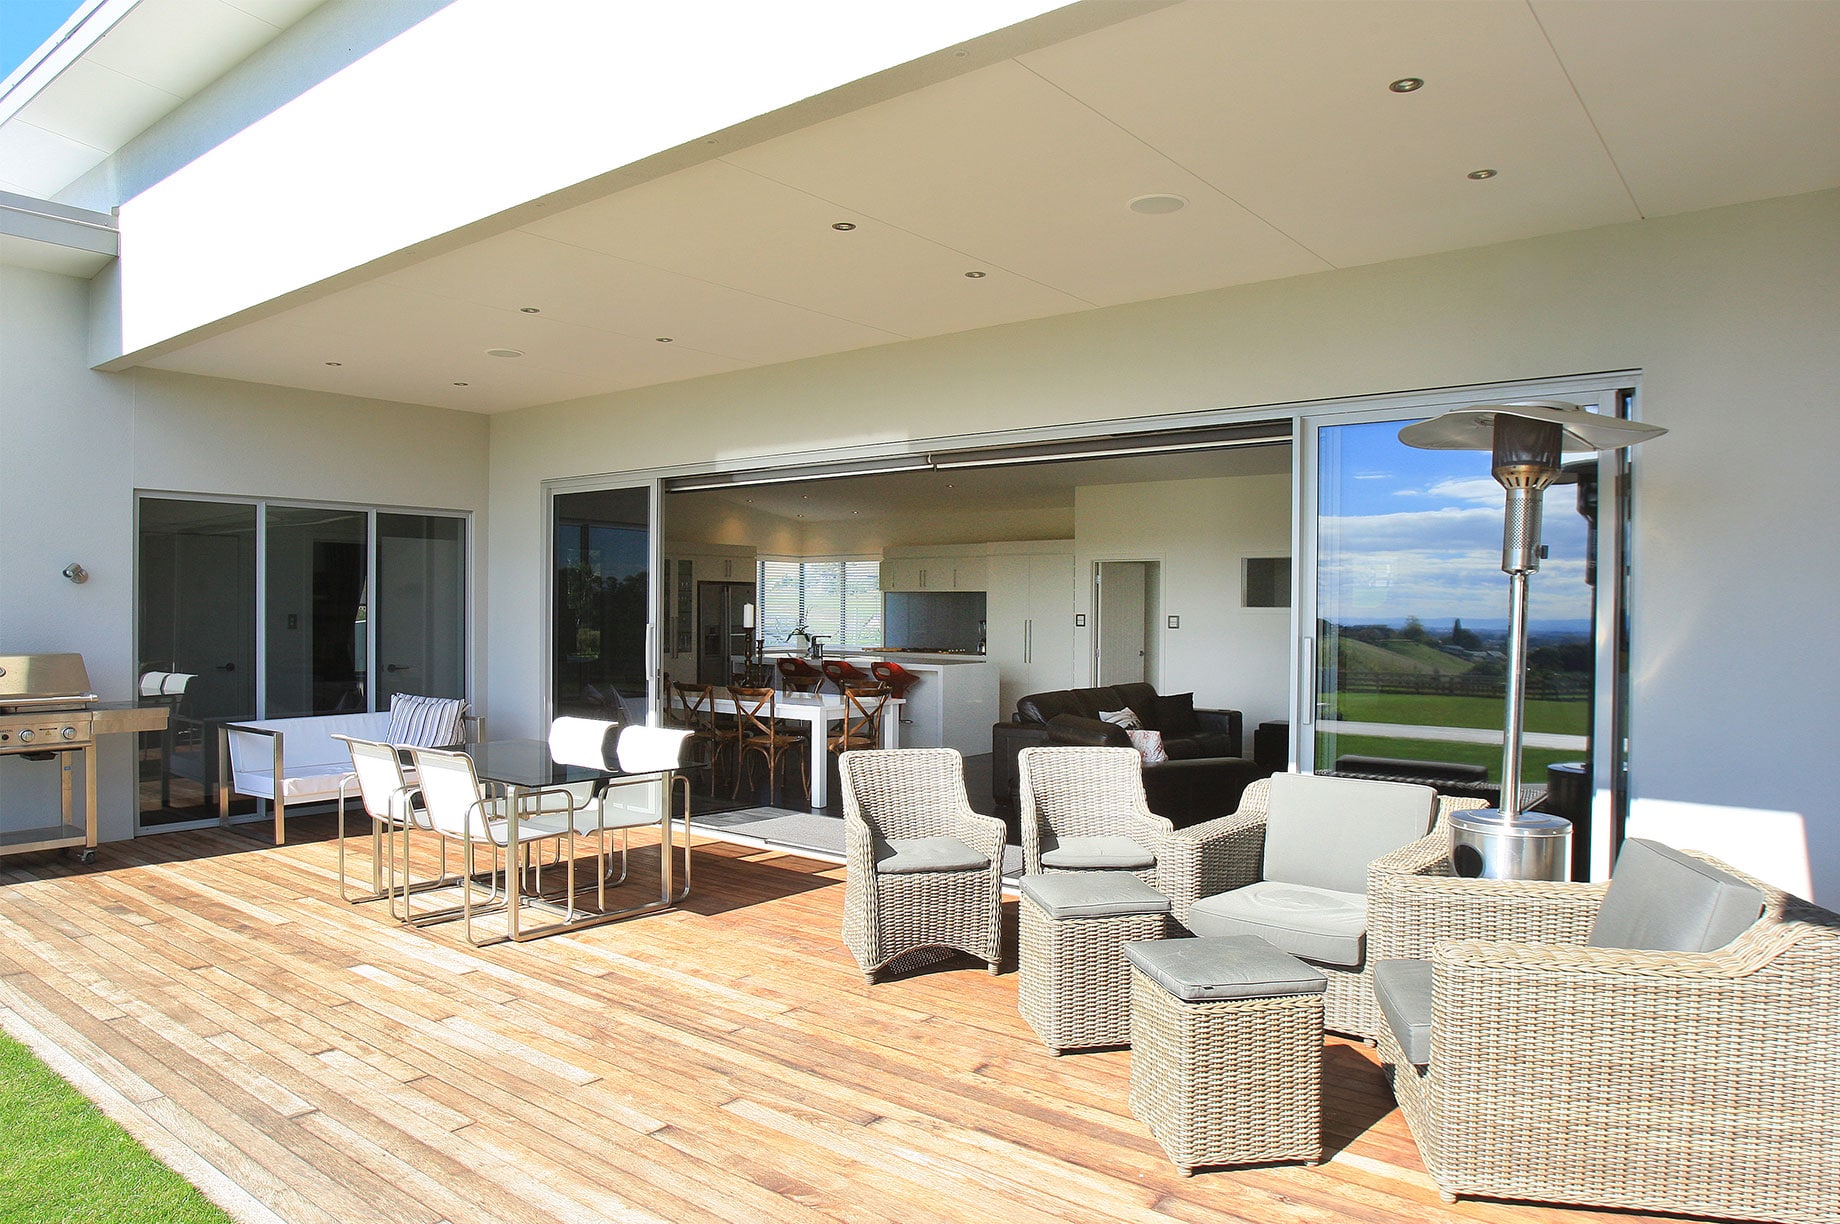 Sheltered outdoor living area on a sunny day